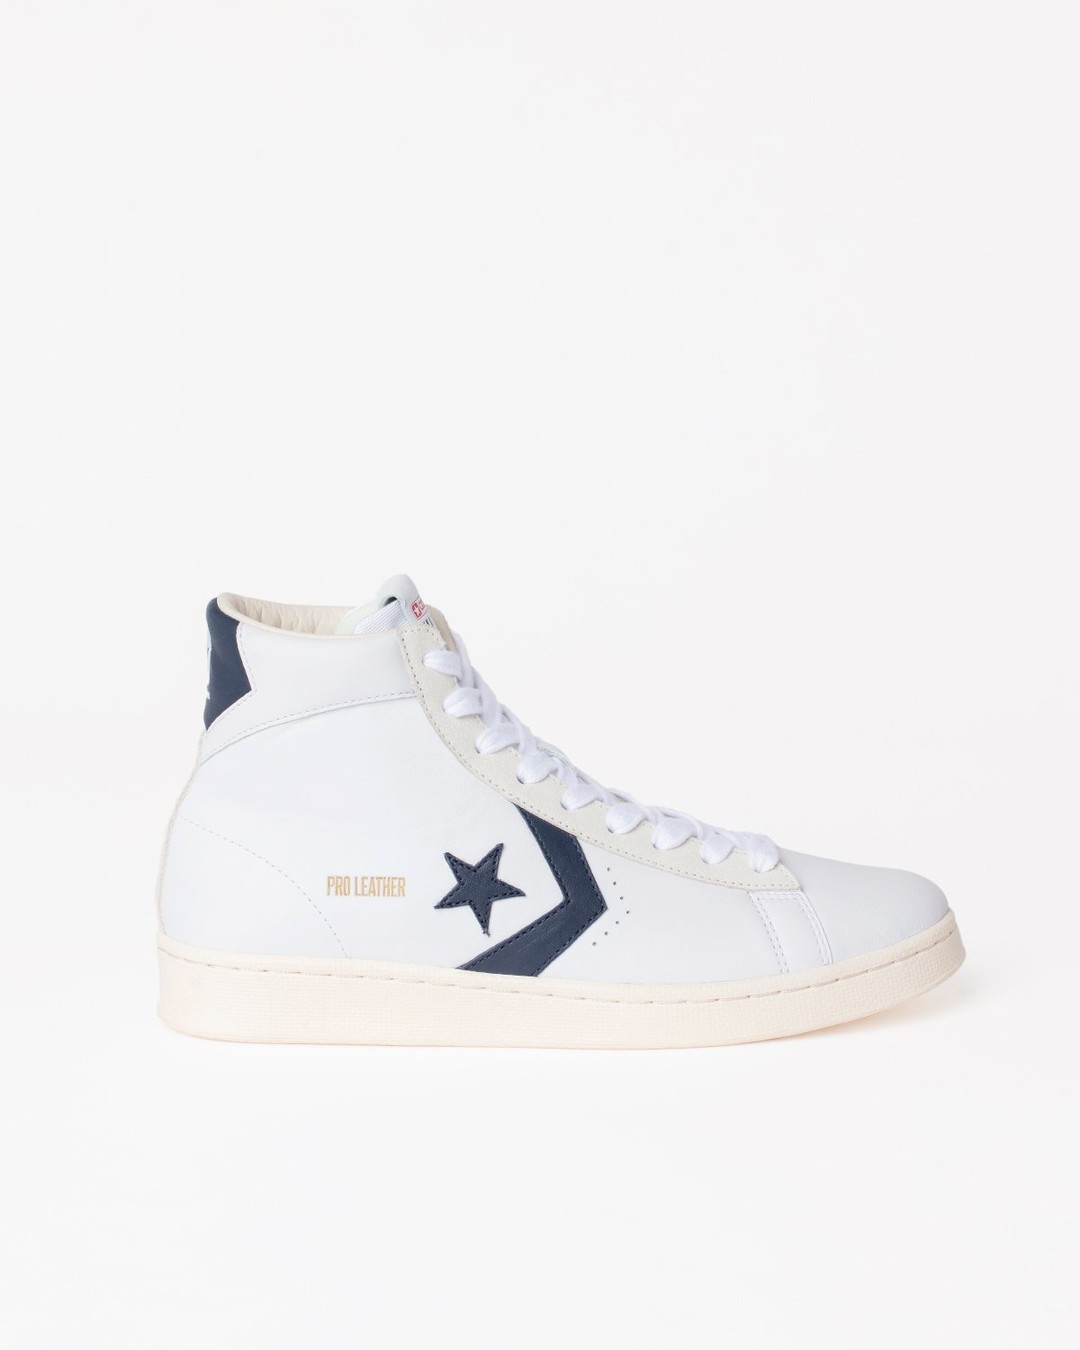 Converse – Pro Leather OG Mid White/Obsidian/Egret - High Top Sneakers - White - Image 1